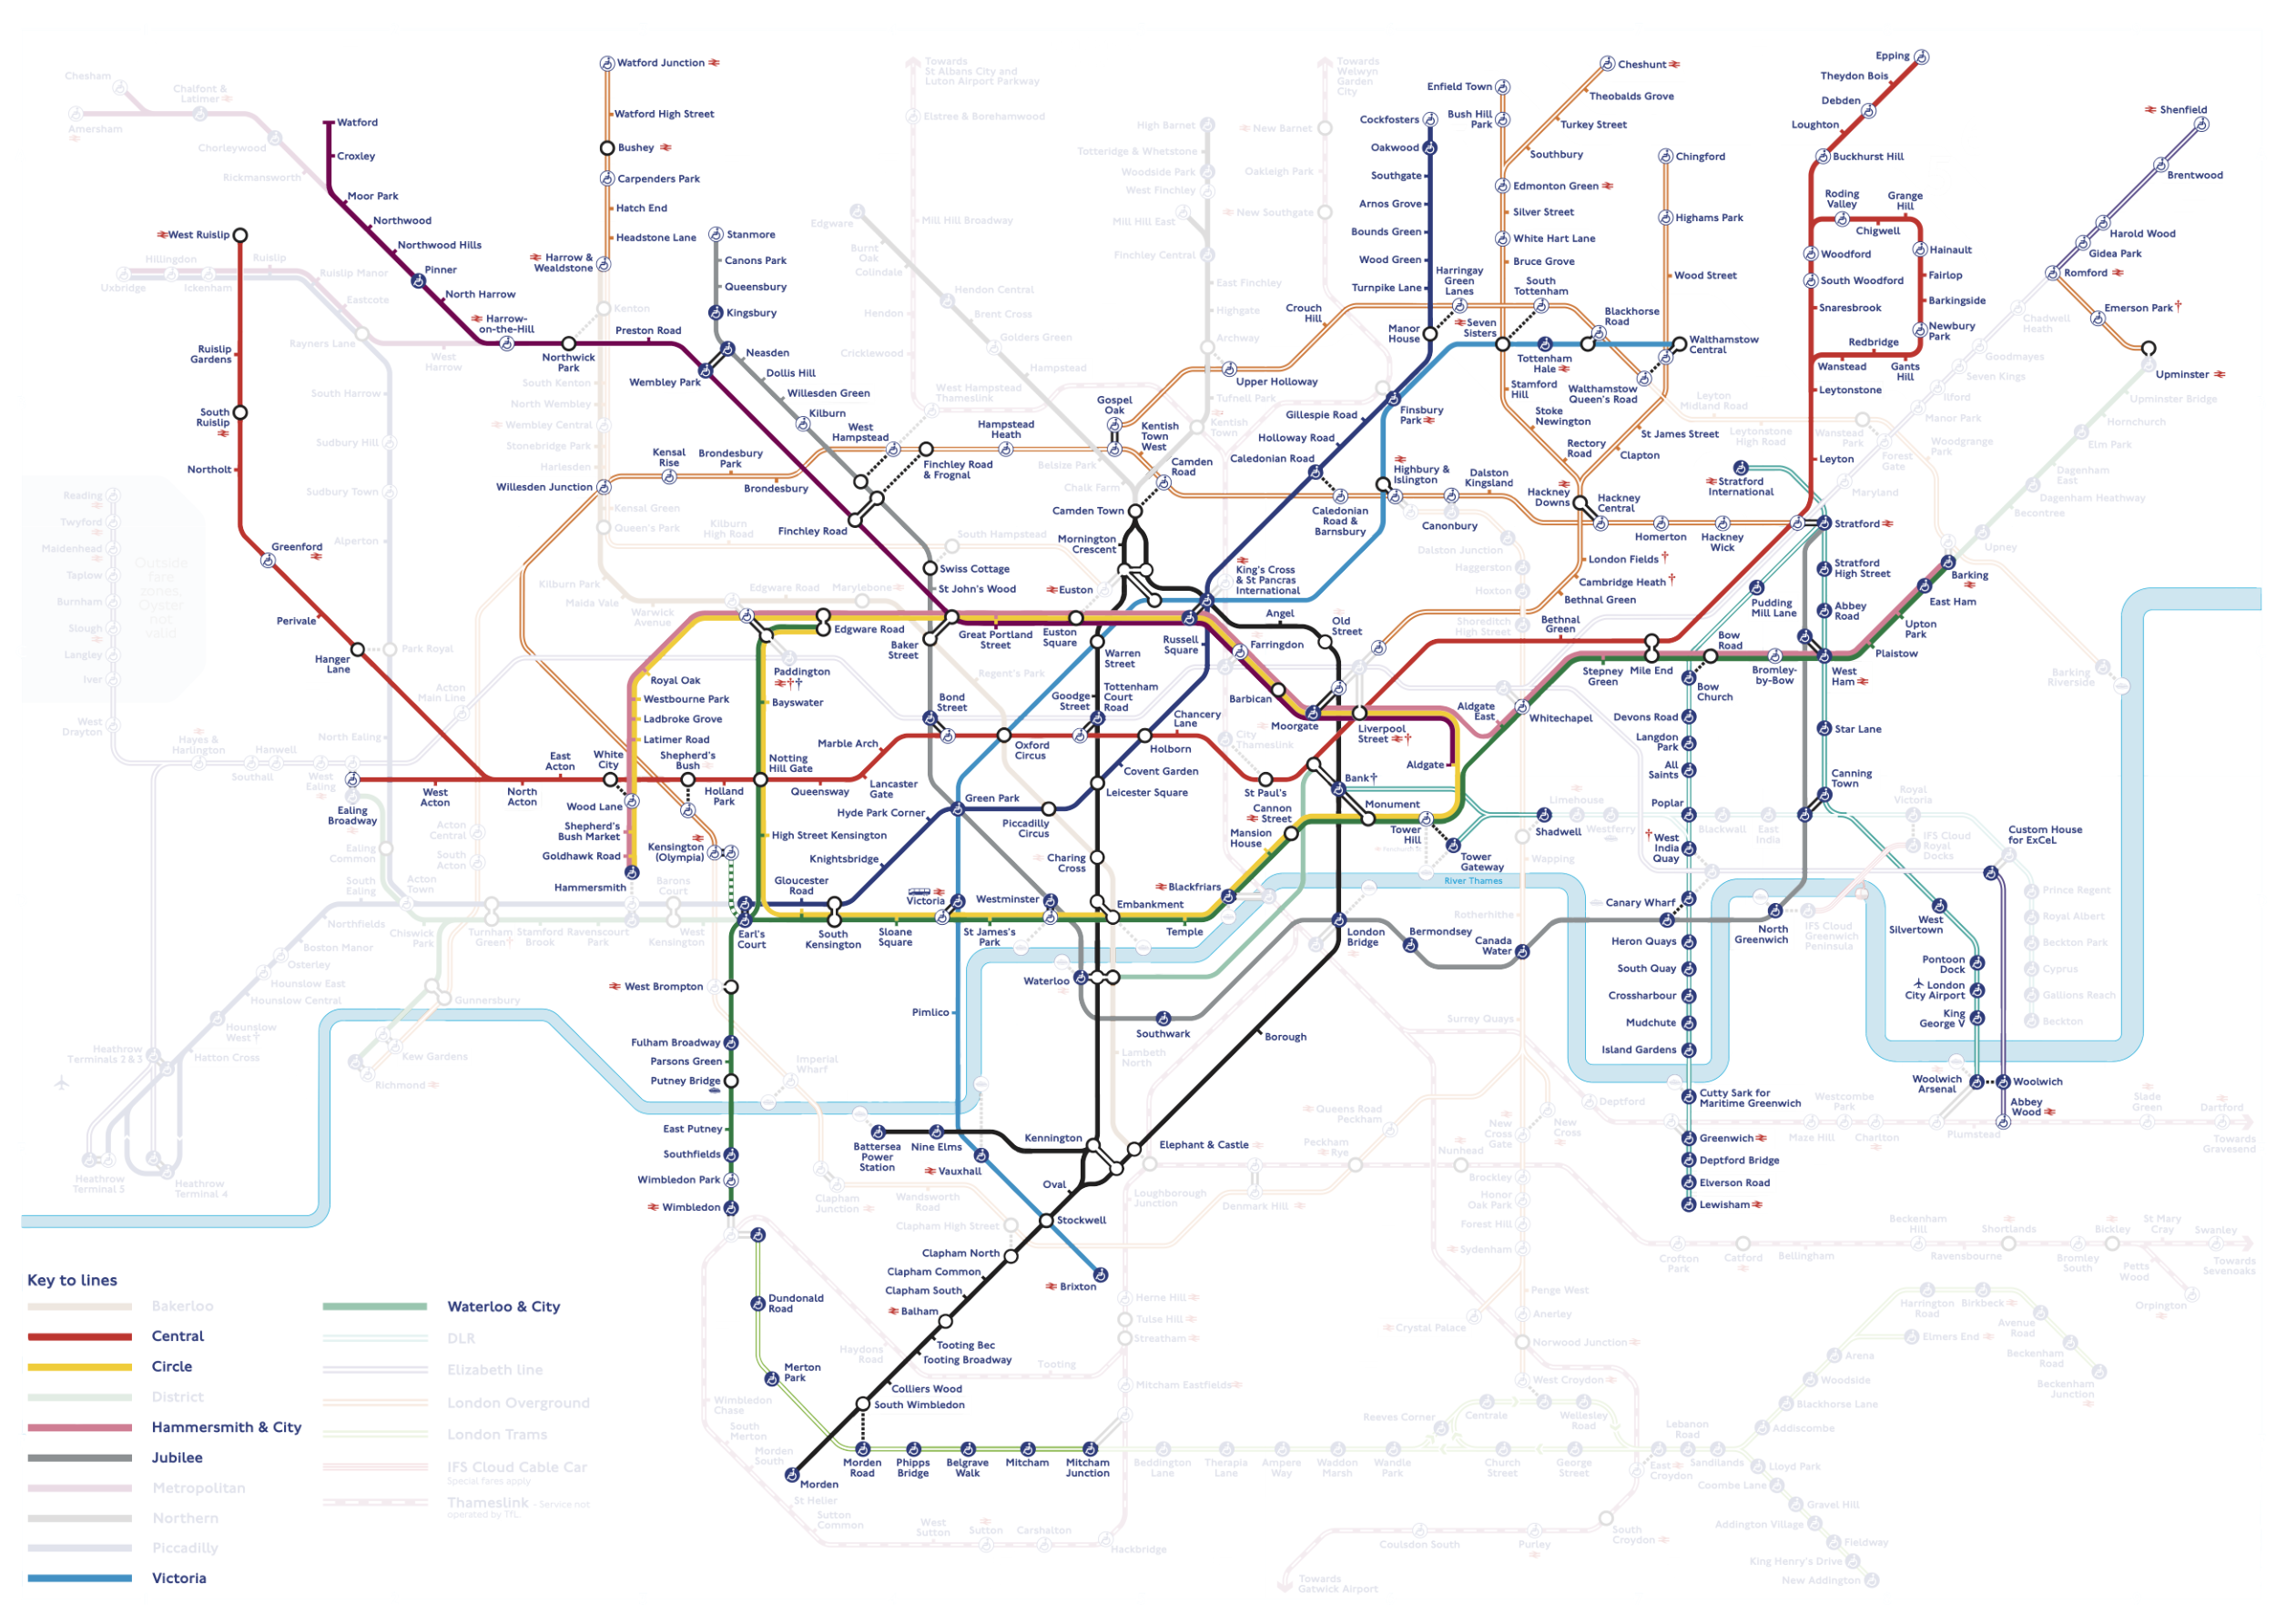 Map showing the parts of the TfL map that I have walked this year - with the Overground's Lea Valley line now complete